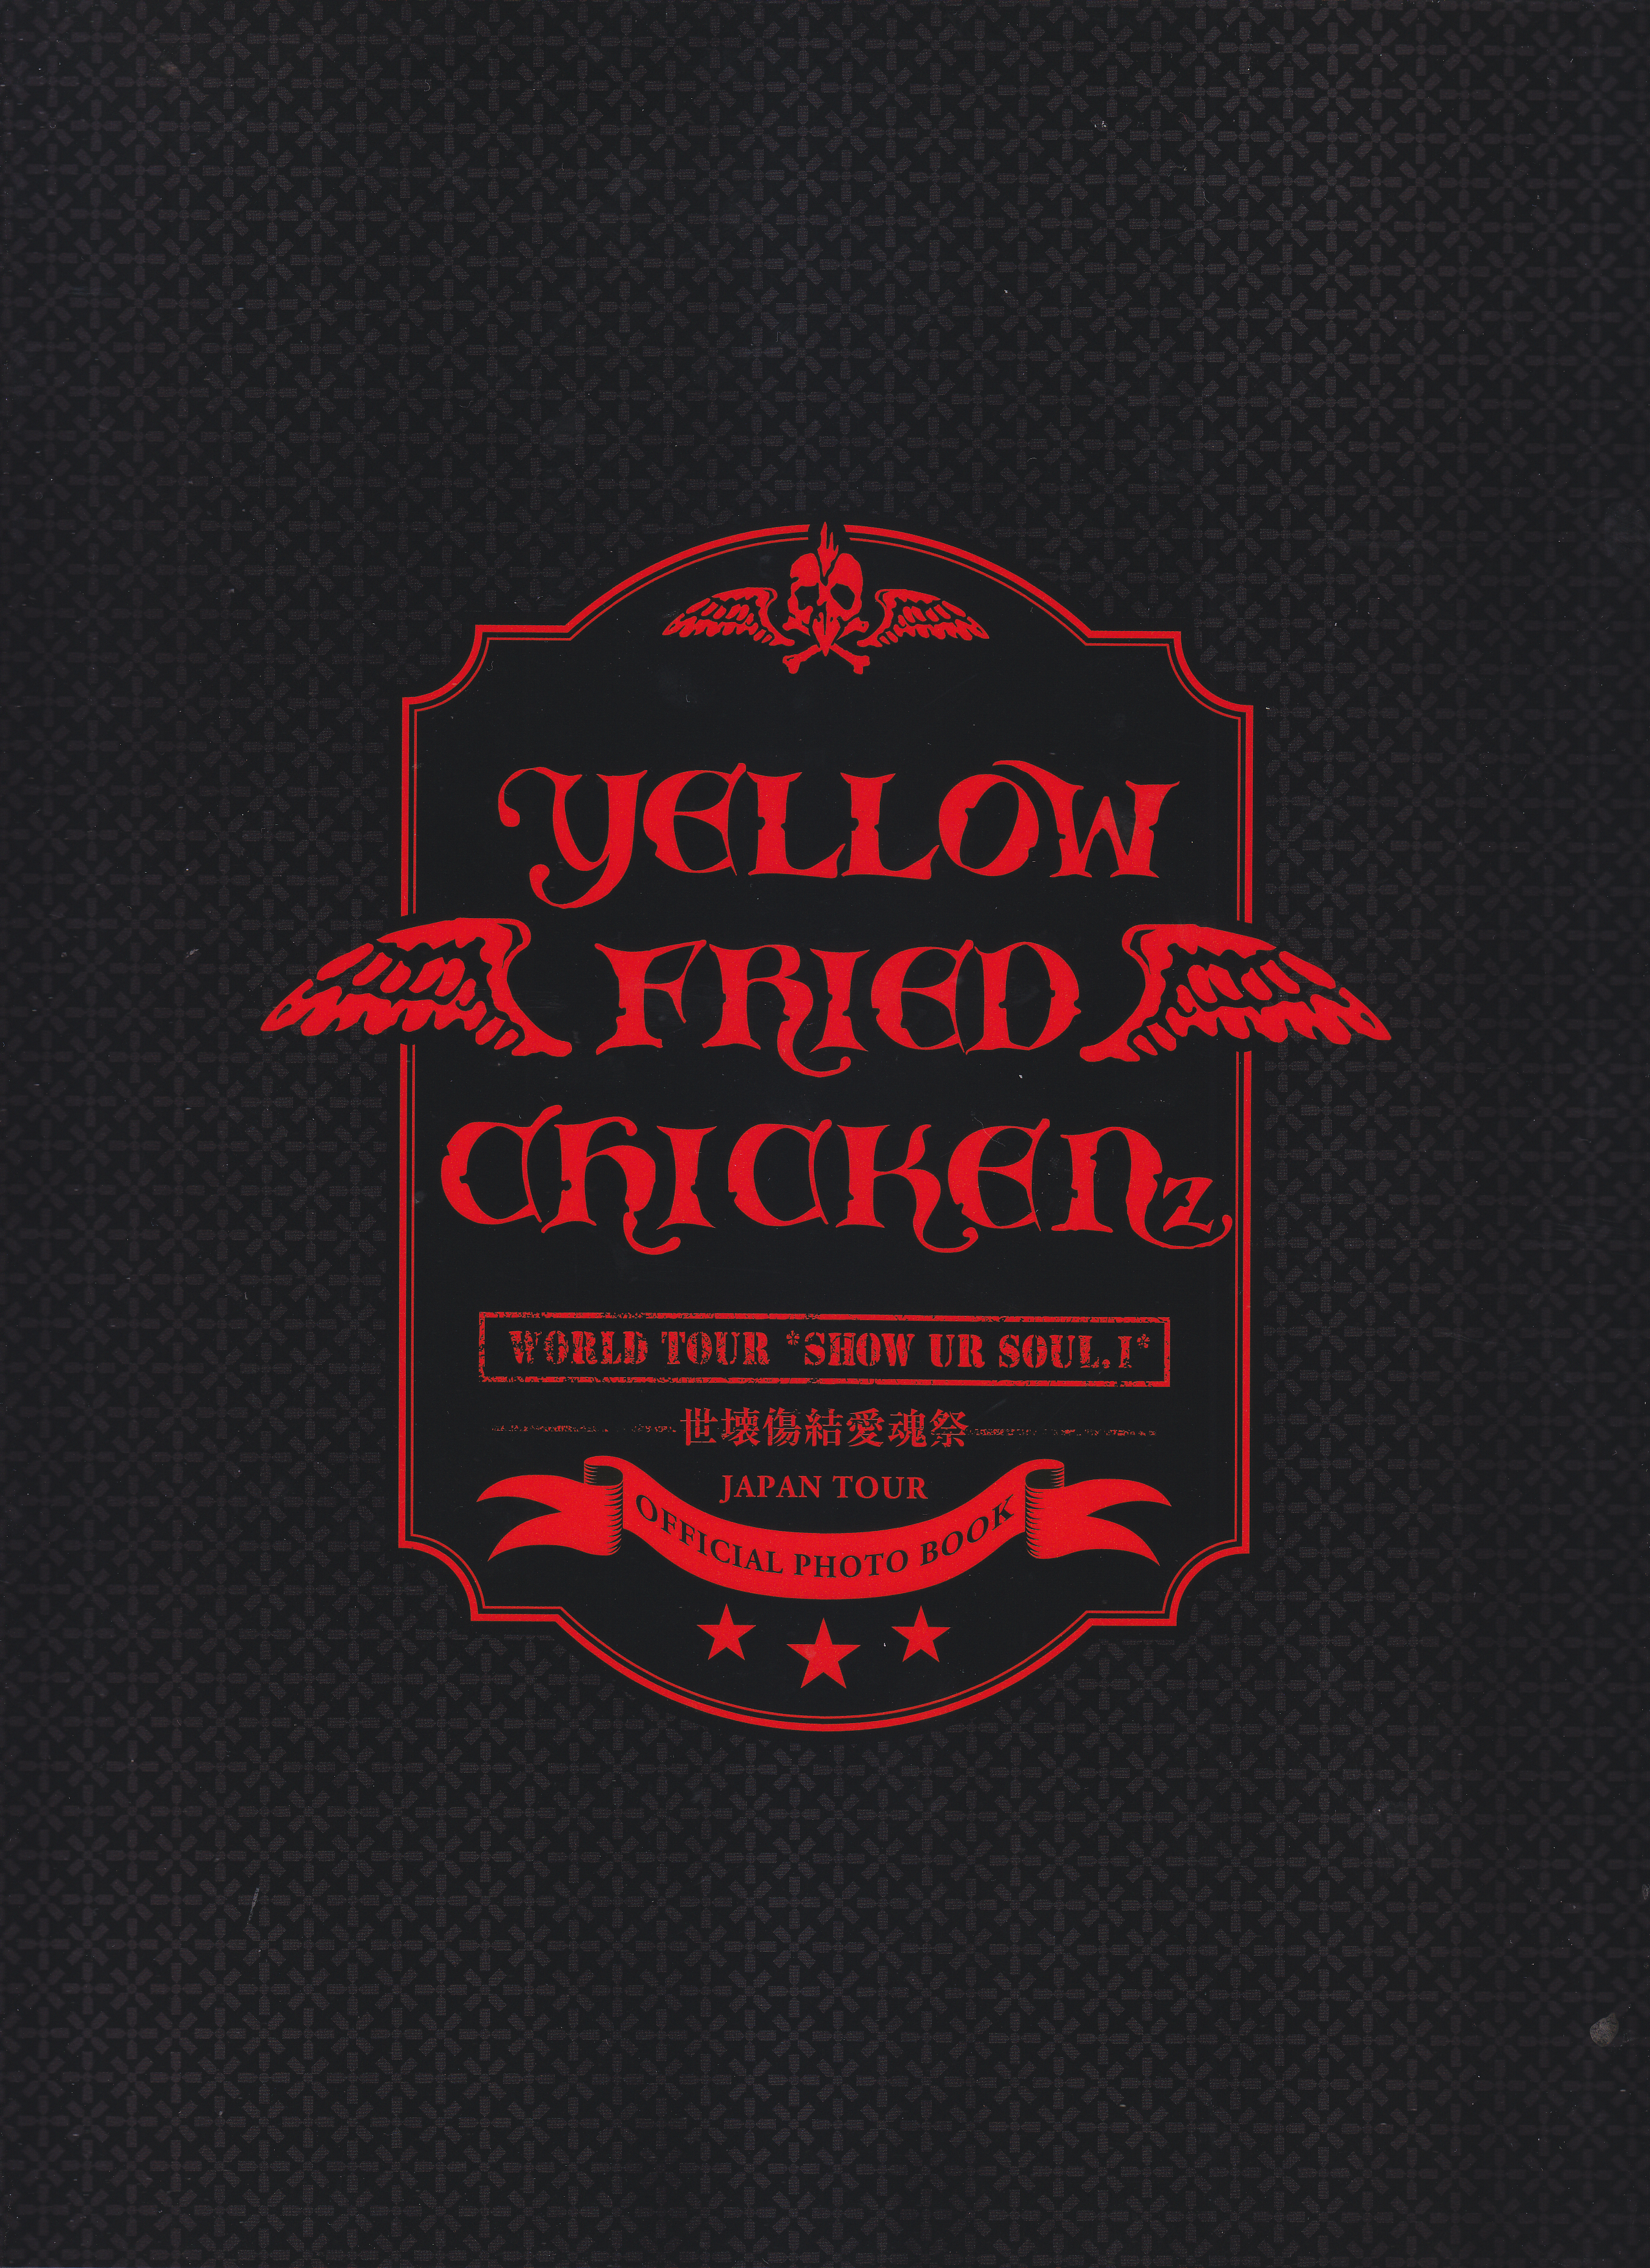 YELLOW FRIED CHICKENz ( イエローフライドチキンズ )  の 書籍 WORLD TOUR “SHOW UR SOUL.I”-世壊傷結愛魂祭-JAPAN TOUR OFFICIAL PHOTO BOOK